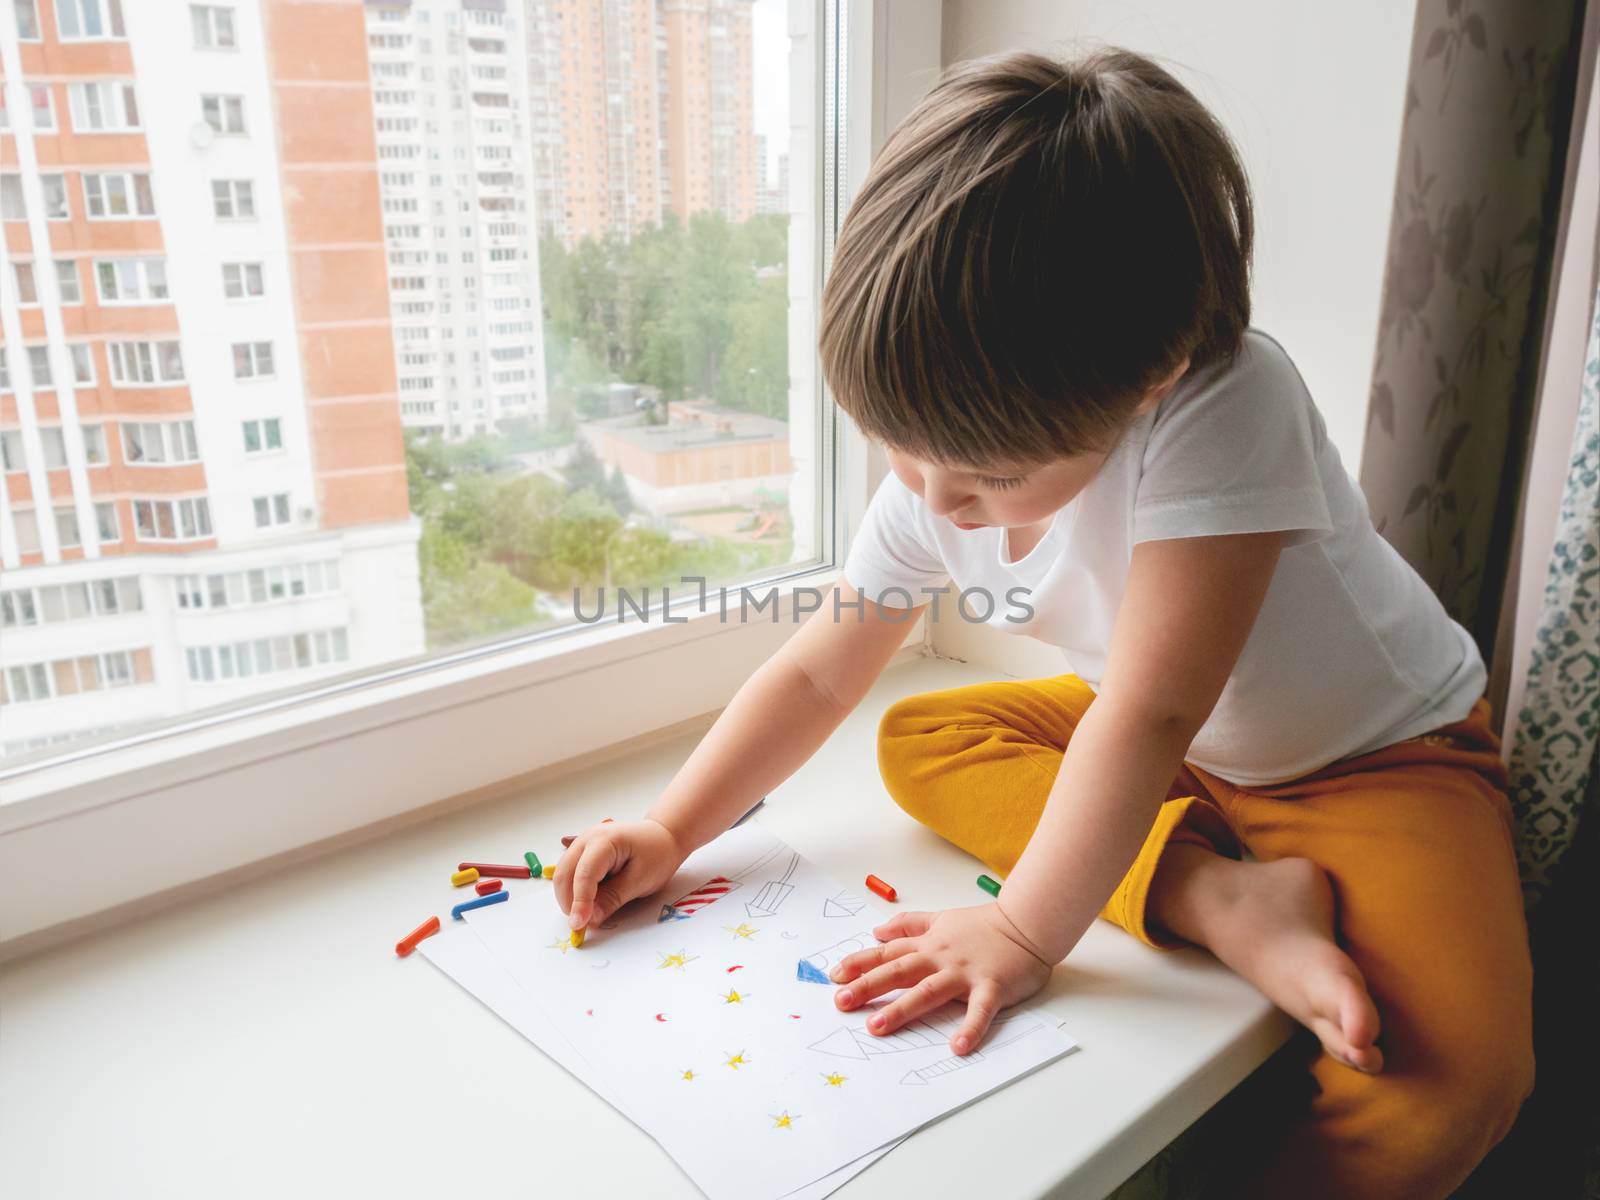 Toddler sits on windowsill and paints colorful fireworks. Child's picture to 4th of July celebration. Independence Day of USA symbol.